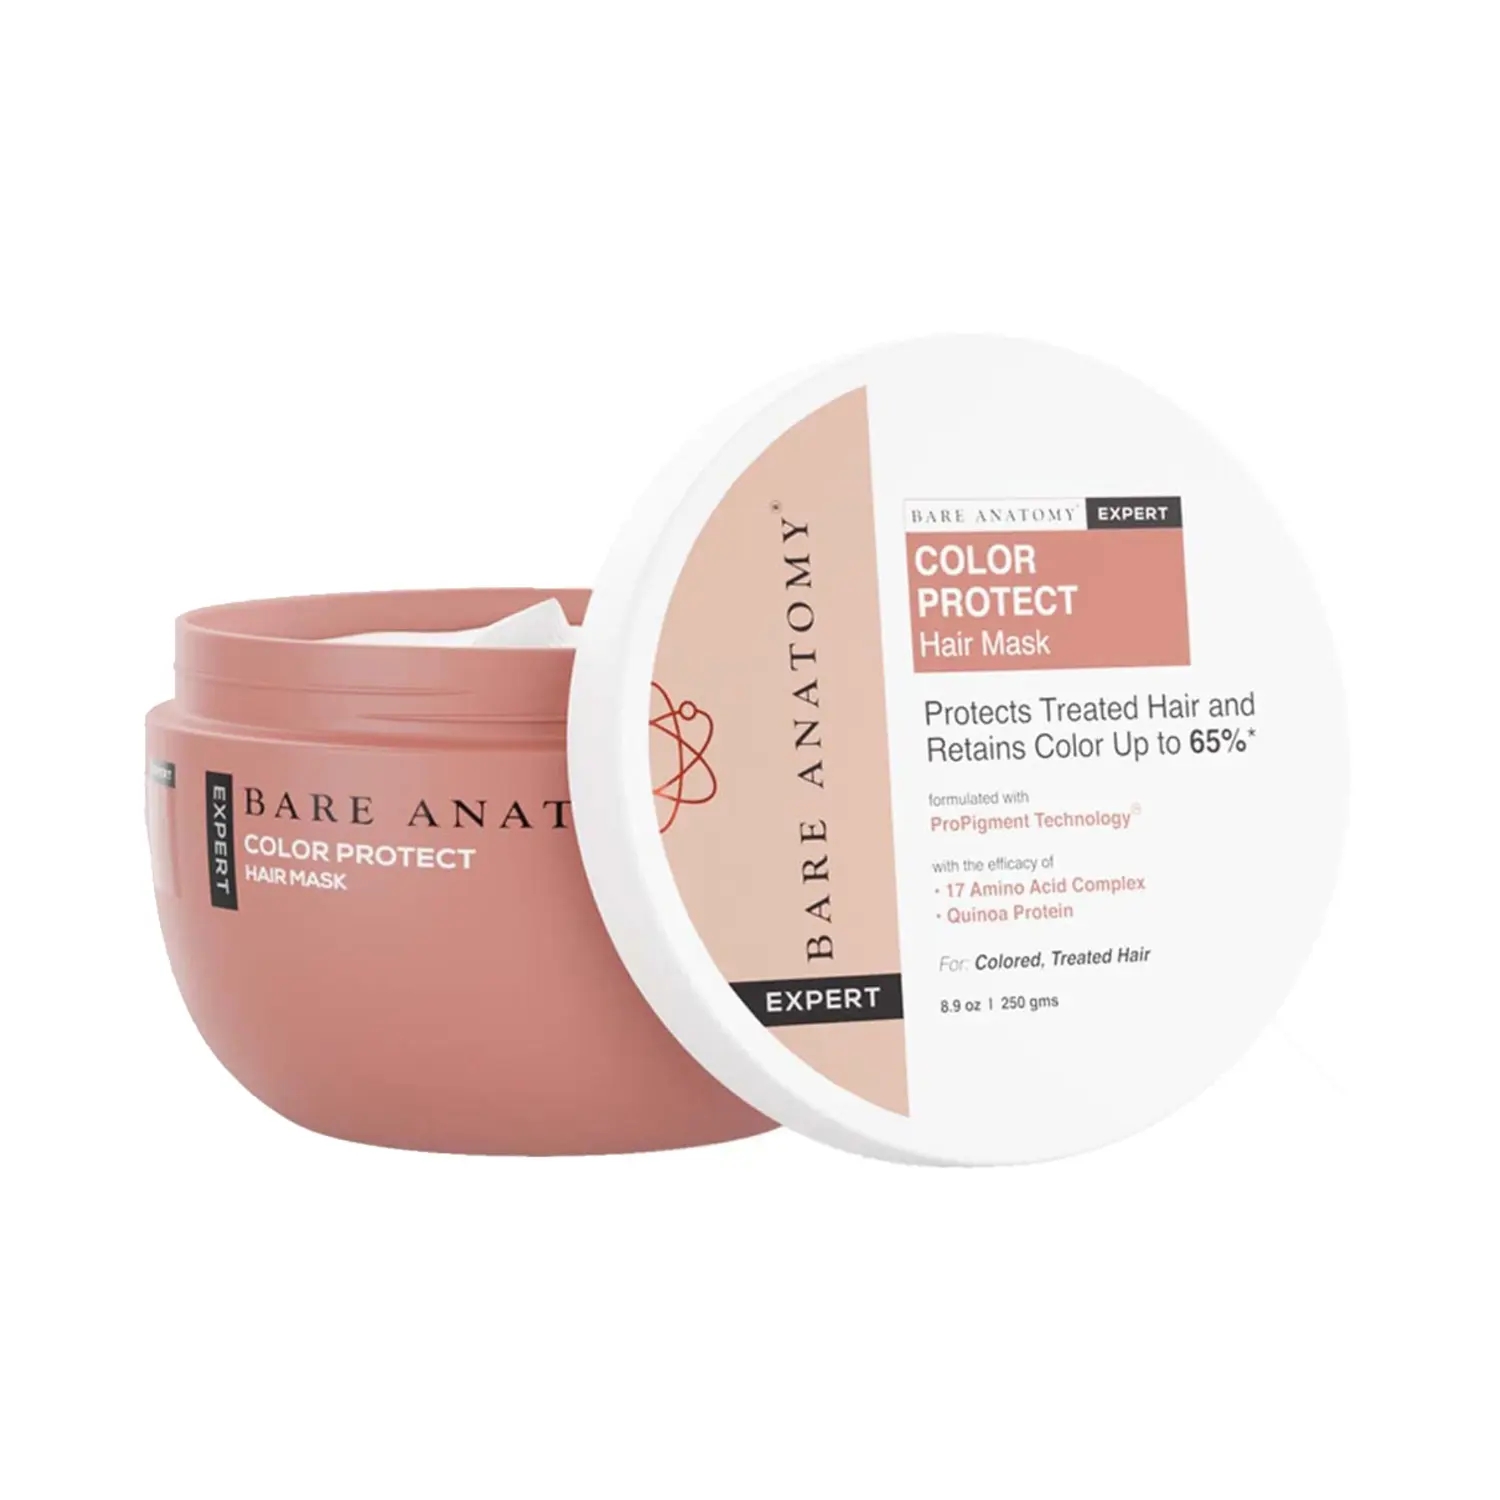 Bare Anatomy Expert Color Protect Hair Mask (250g)